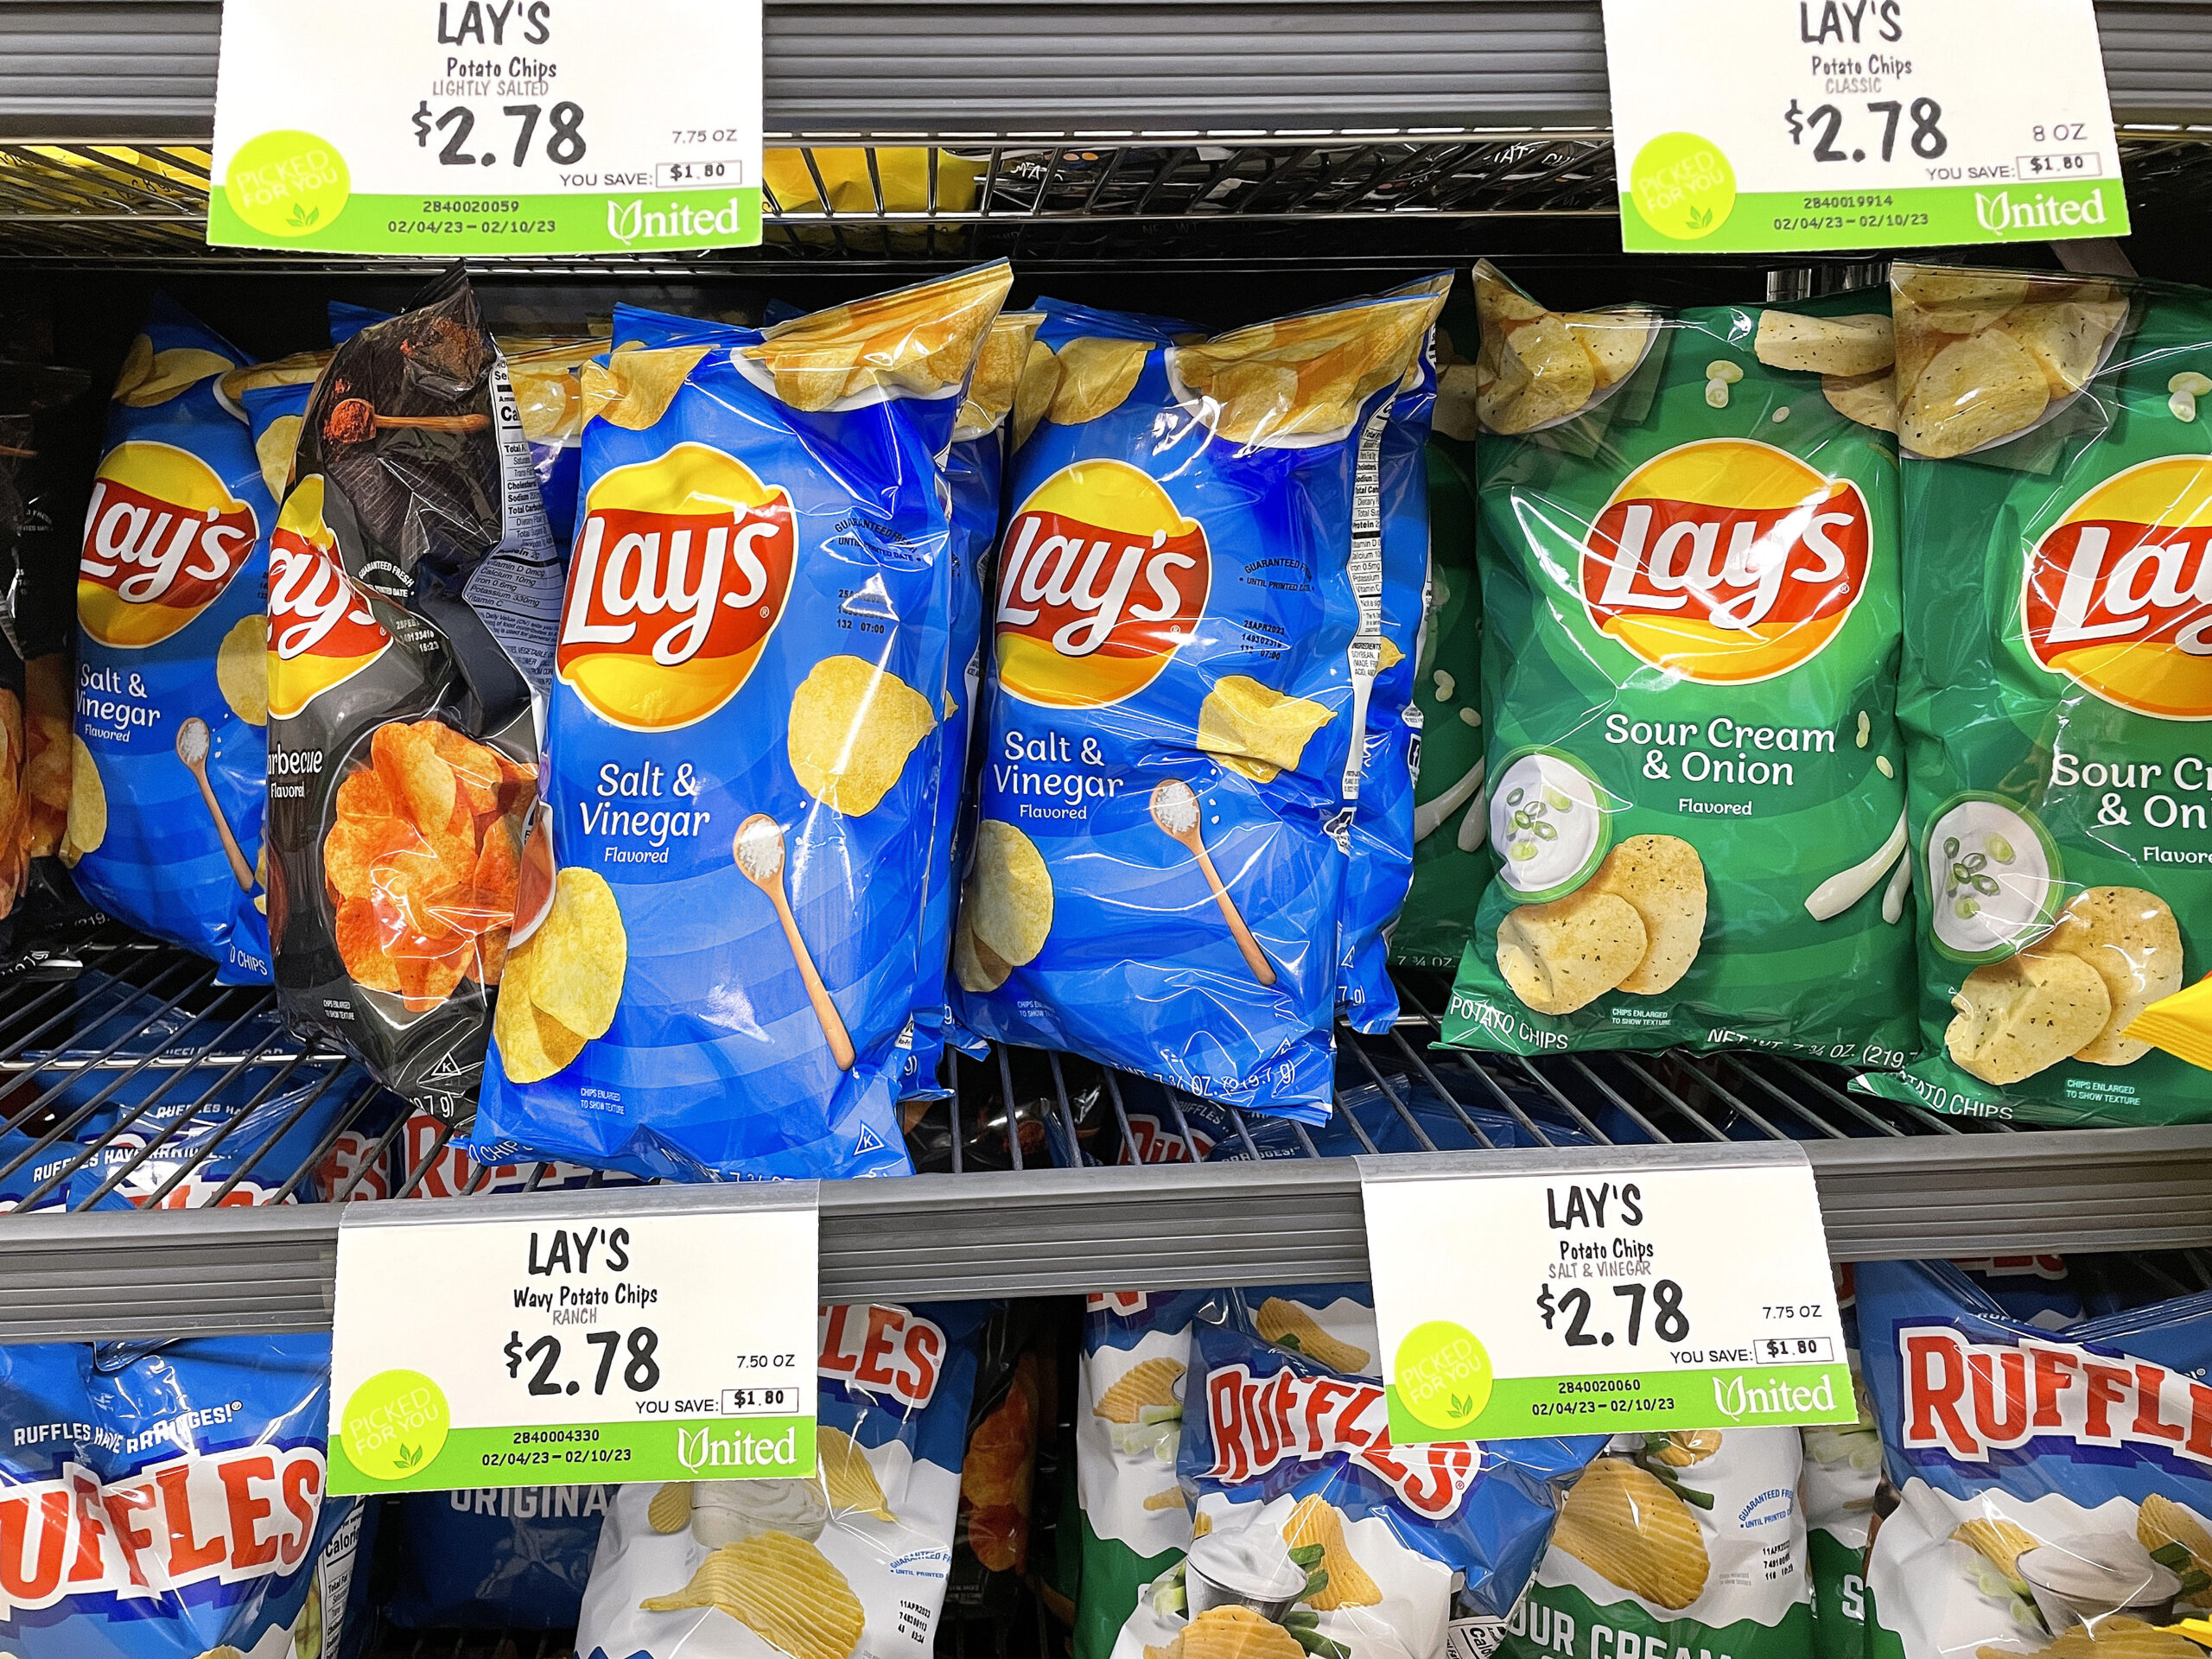 The State of ‘Shrinkflation’: Why Biden called out skimpy bags of potato chips